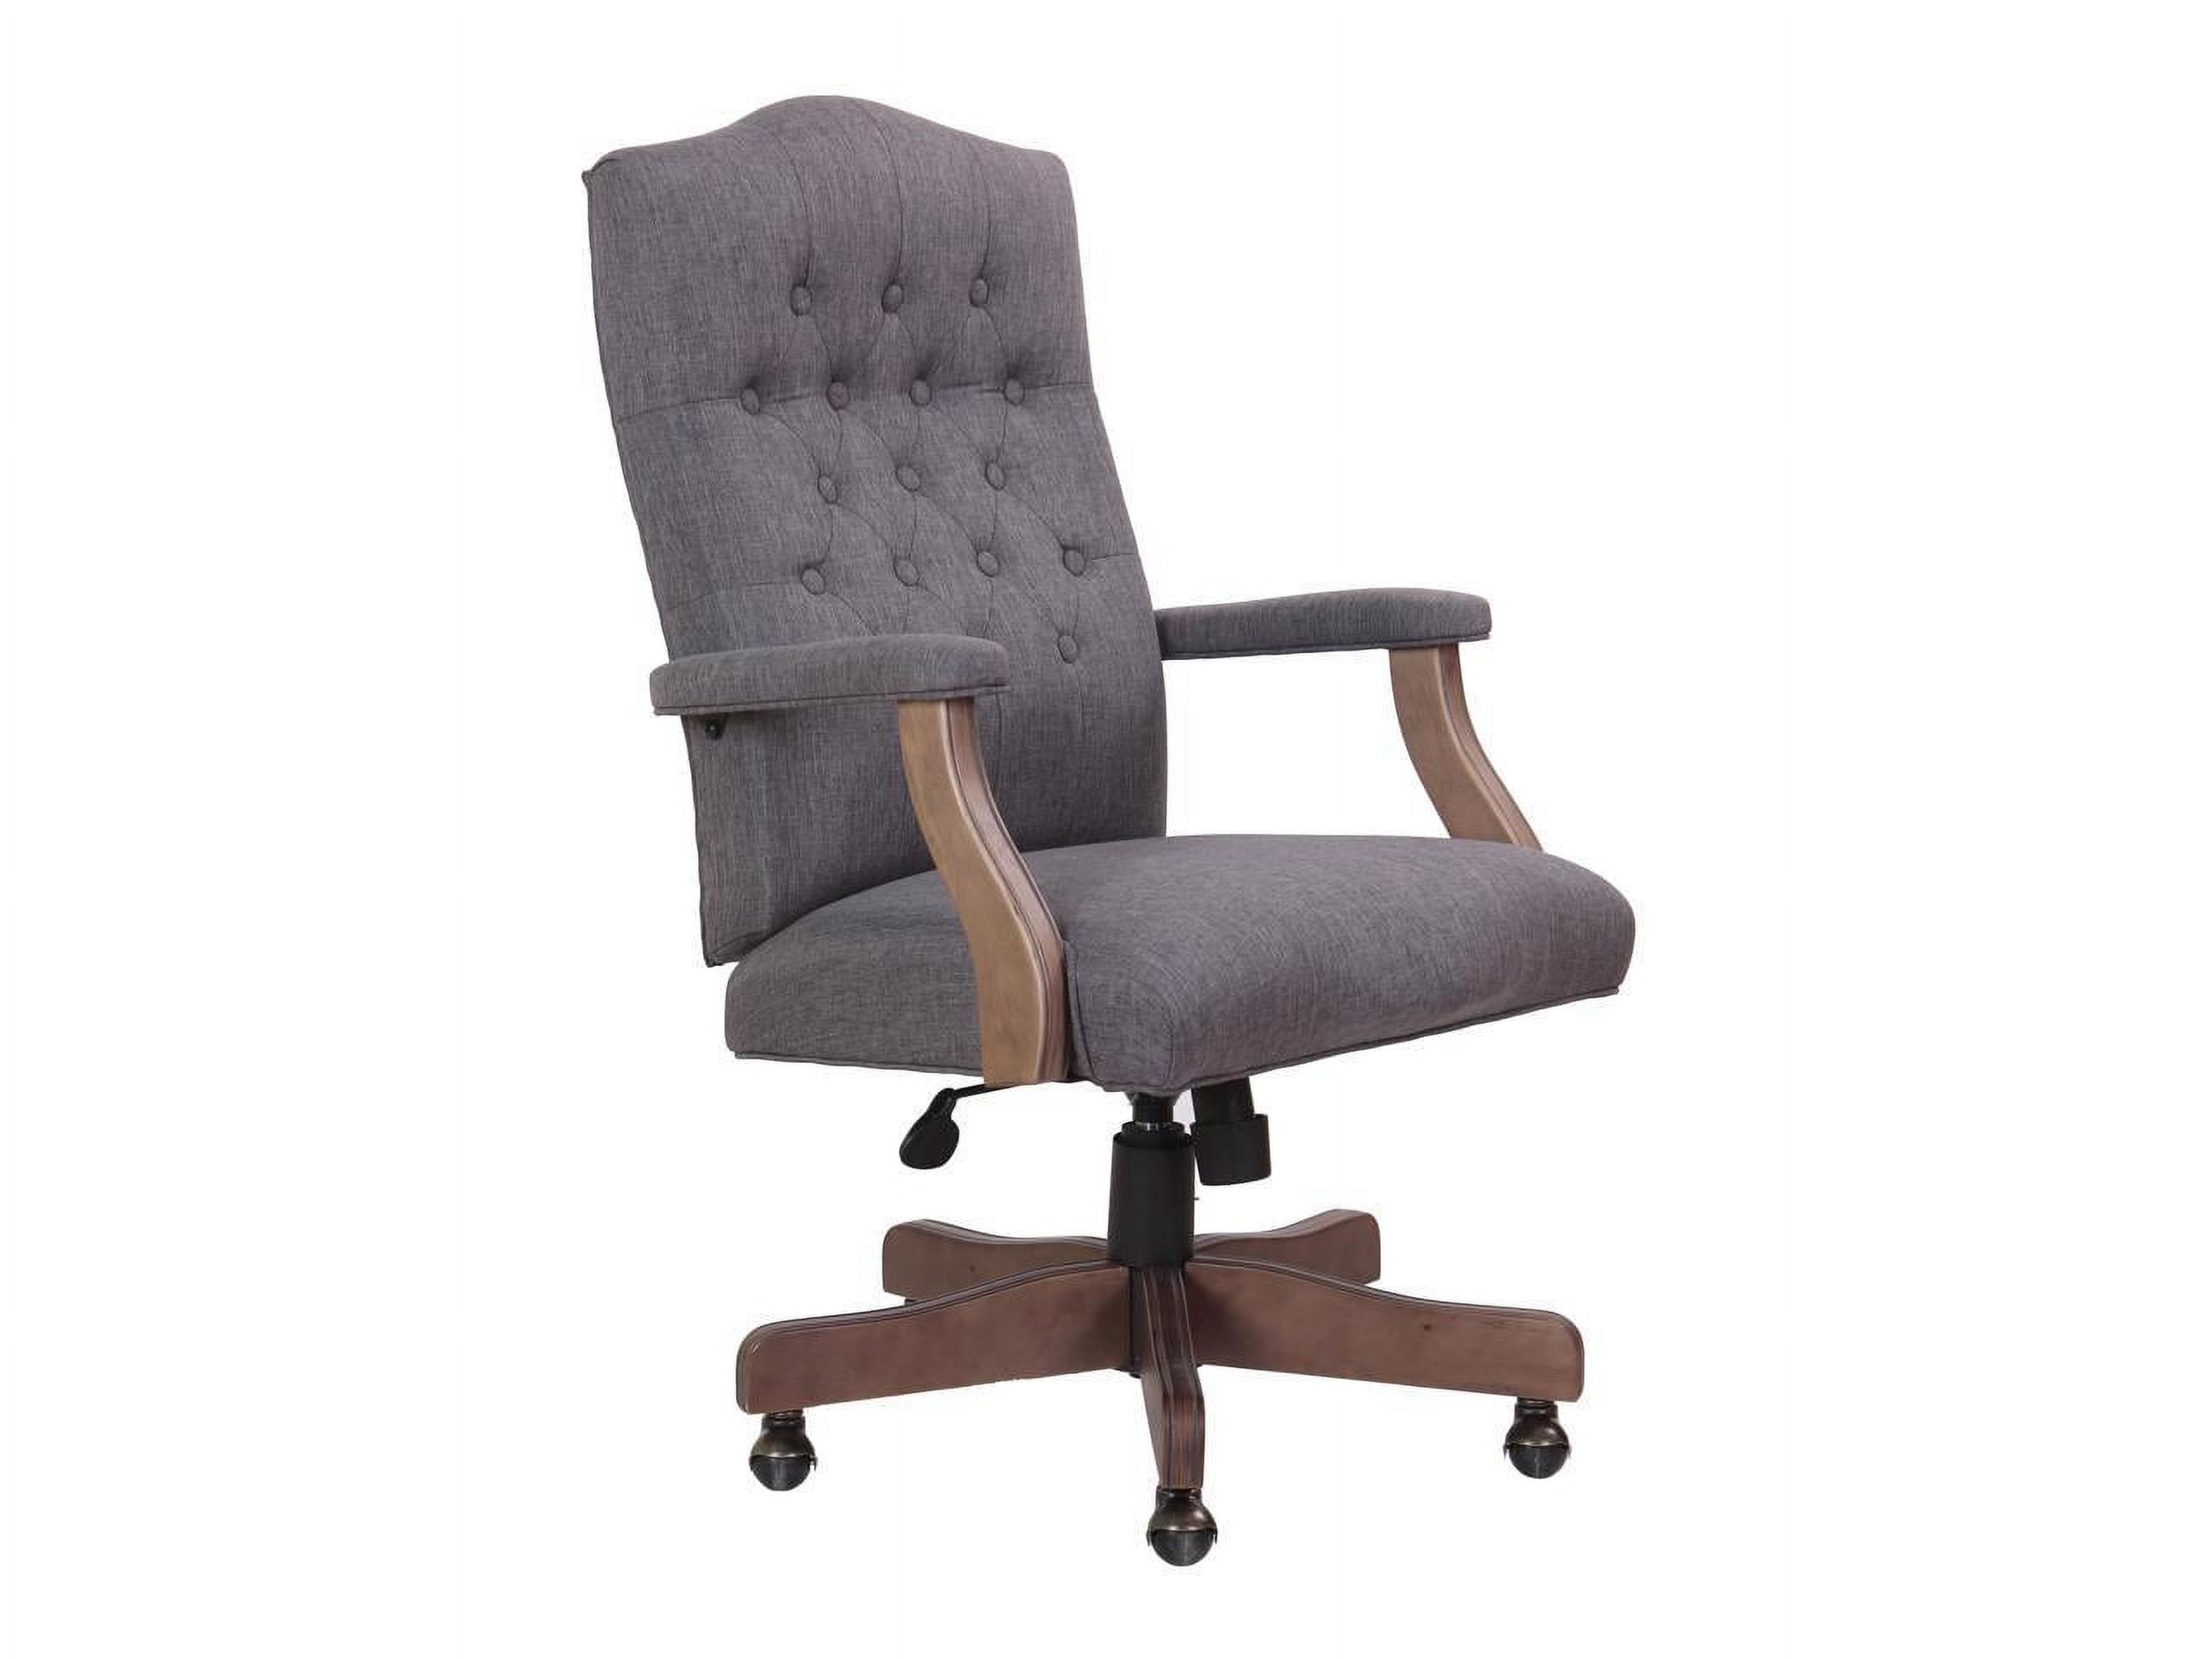 Boss Refined Rustic Executive Chair in Slate Gray Commercial Grade - image 3 of 8